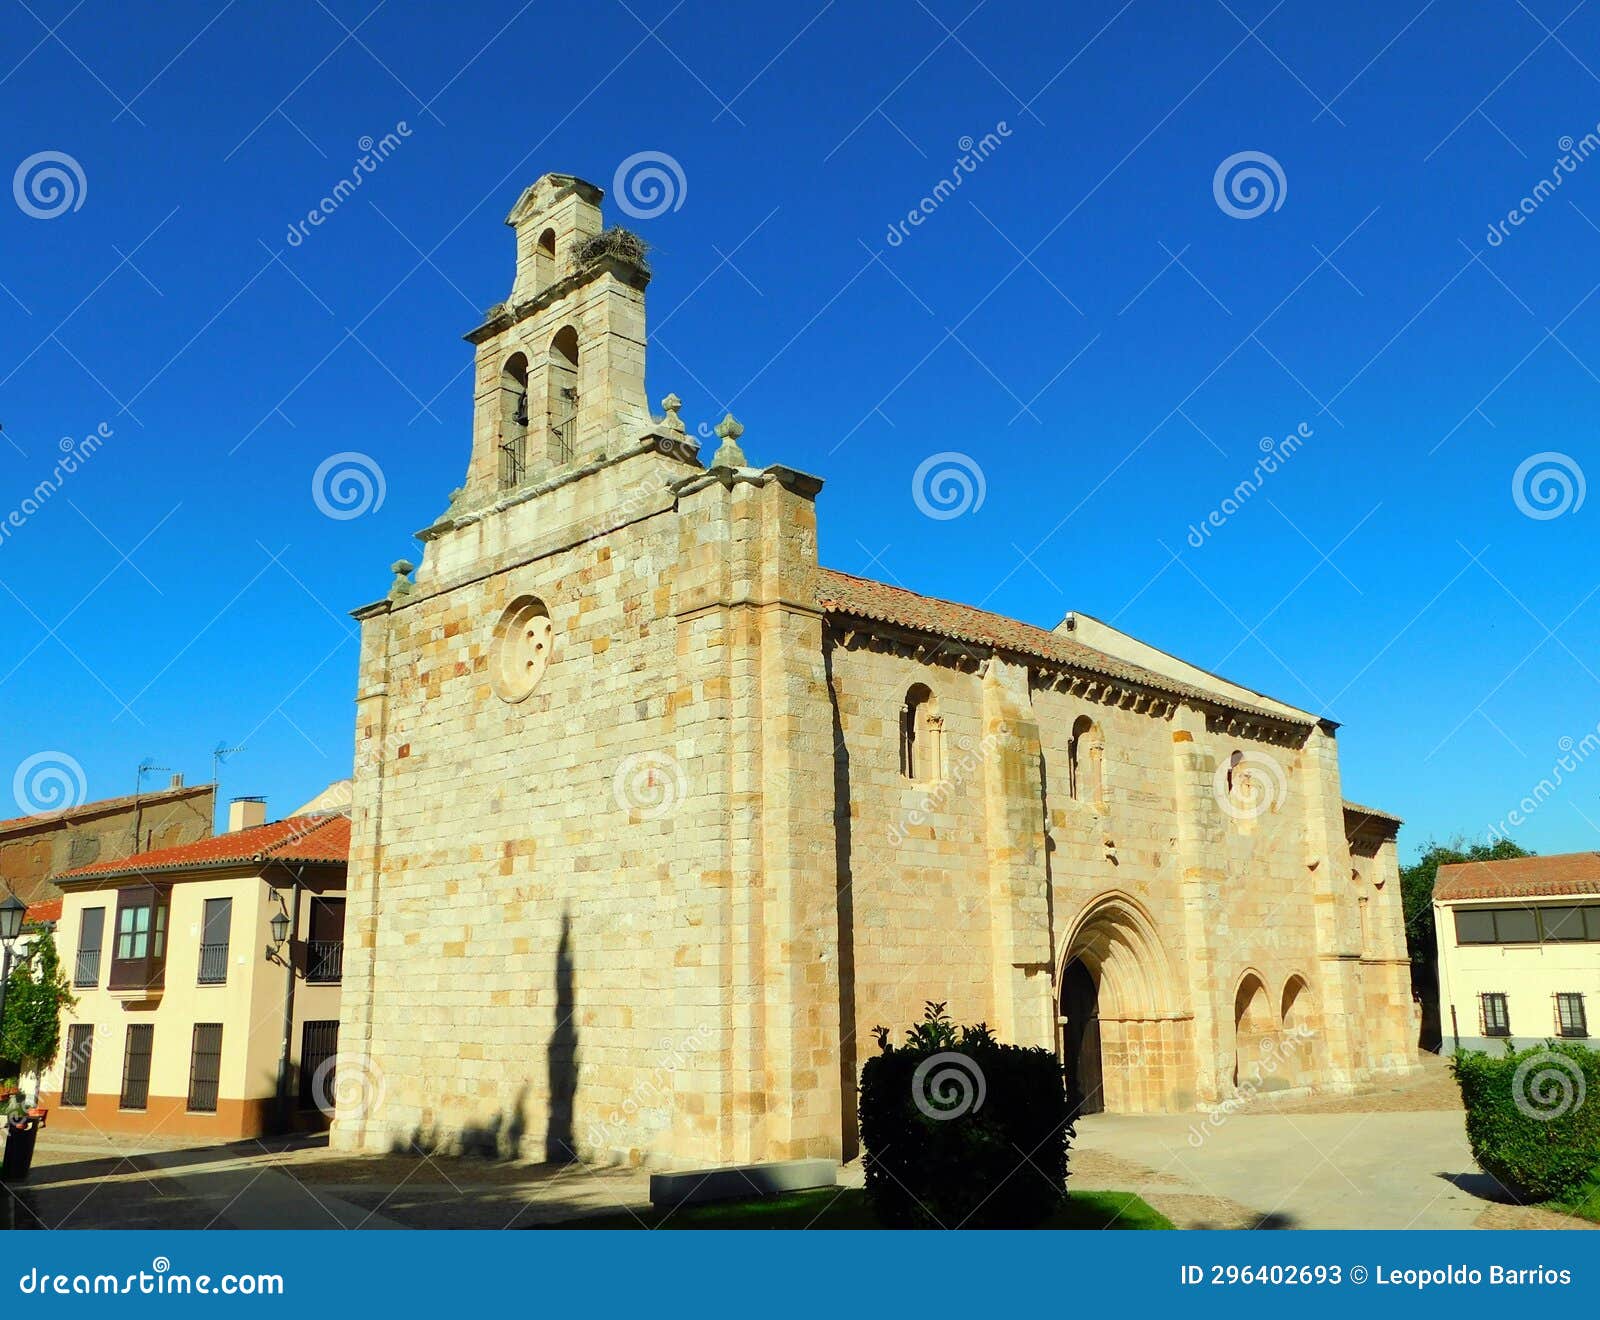 the church of san isidoro is a romanesque monument in zamora